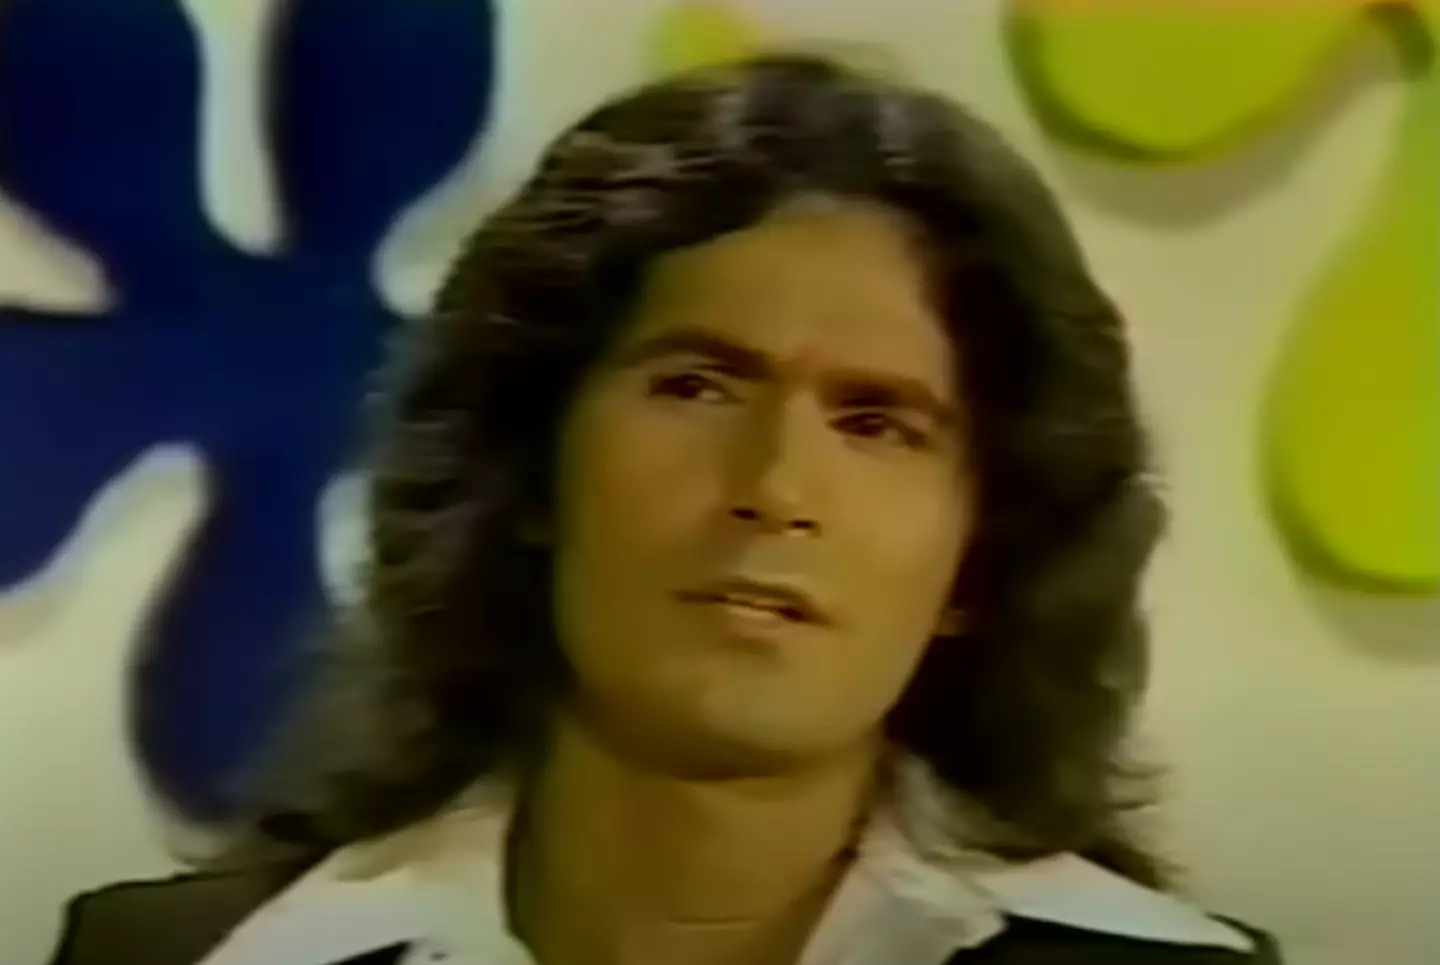 Roger Alcala got his nickname because he had once appeared on The Dating Game (ABC)